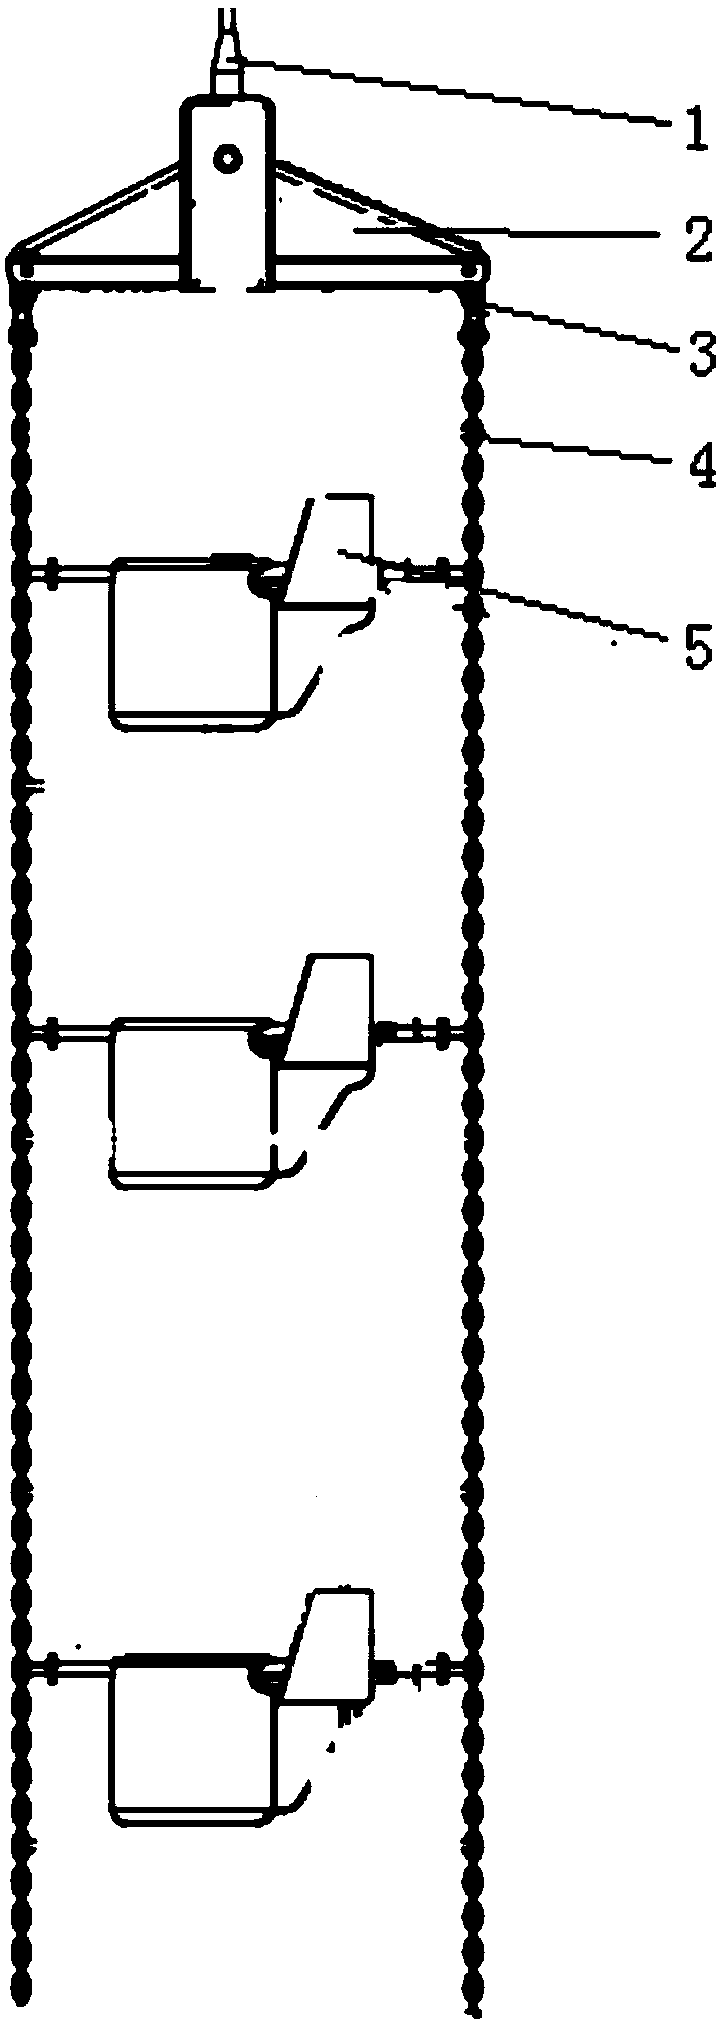 A flexible vertical towing chain system for underwater multi-towed bodies